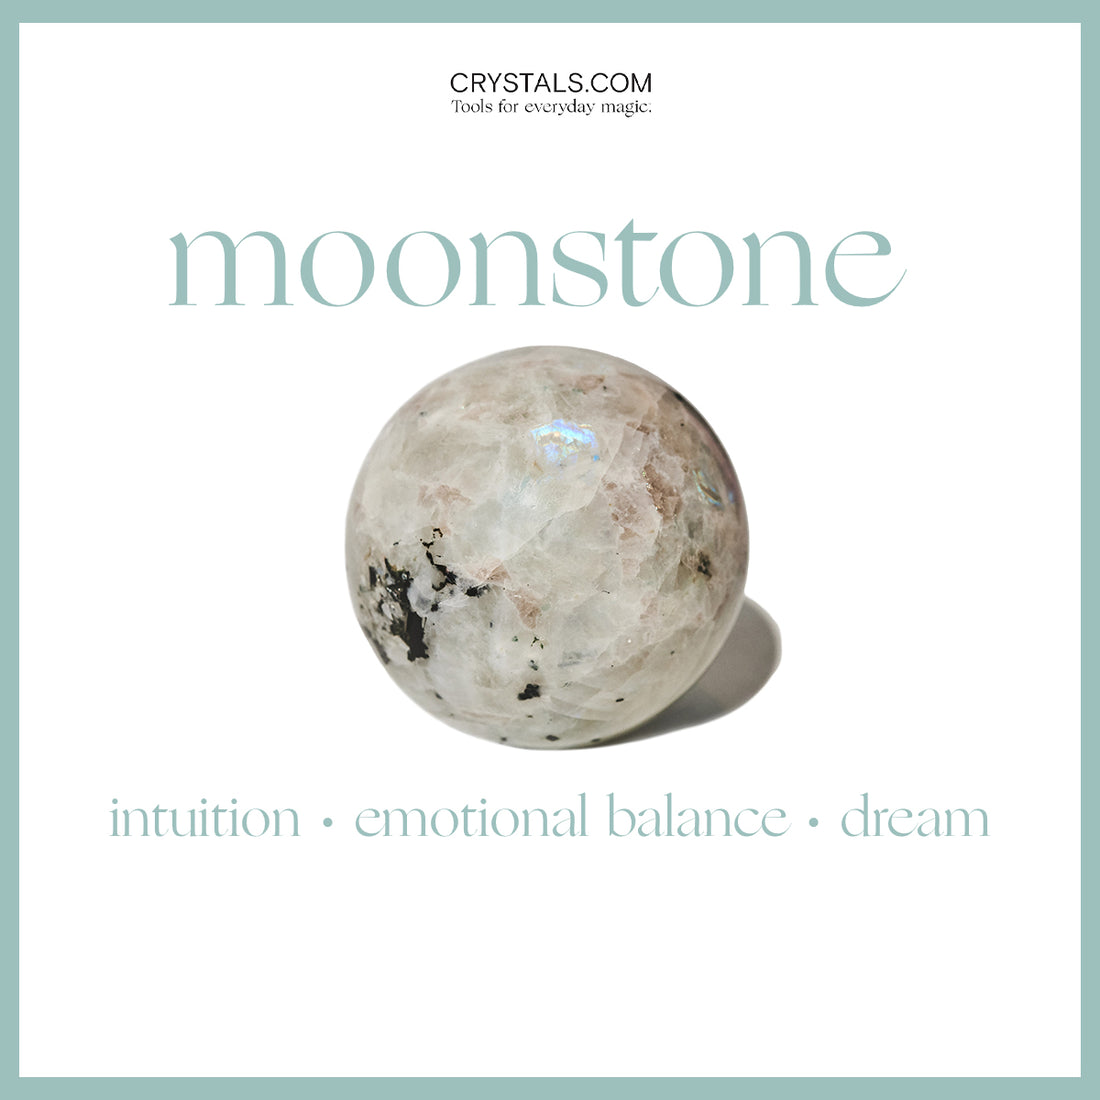 Moonstone Crystal Meaning and Healing Properties